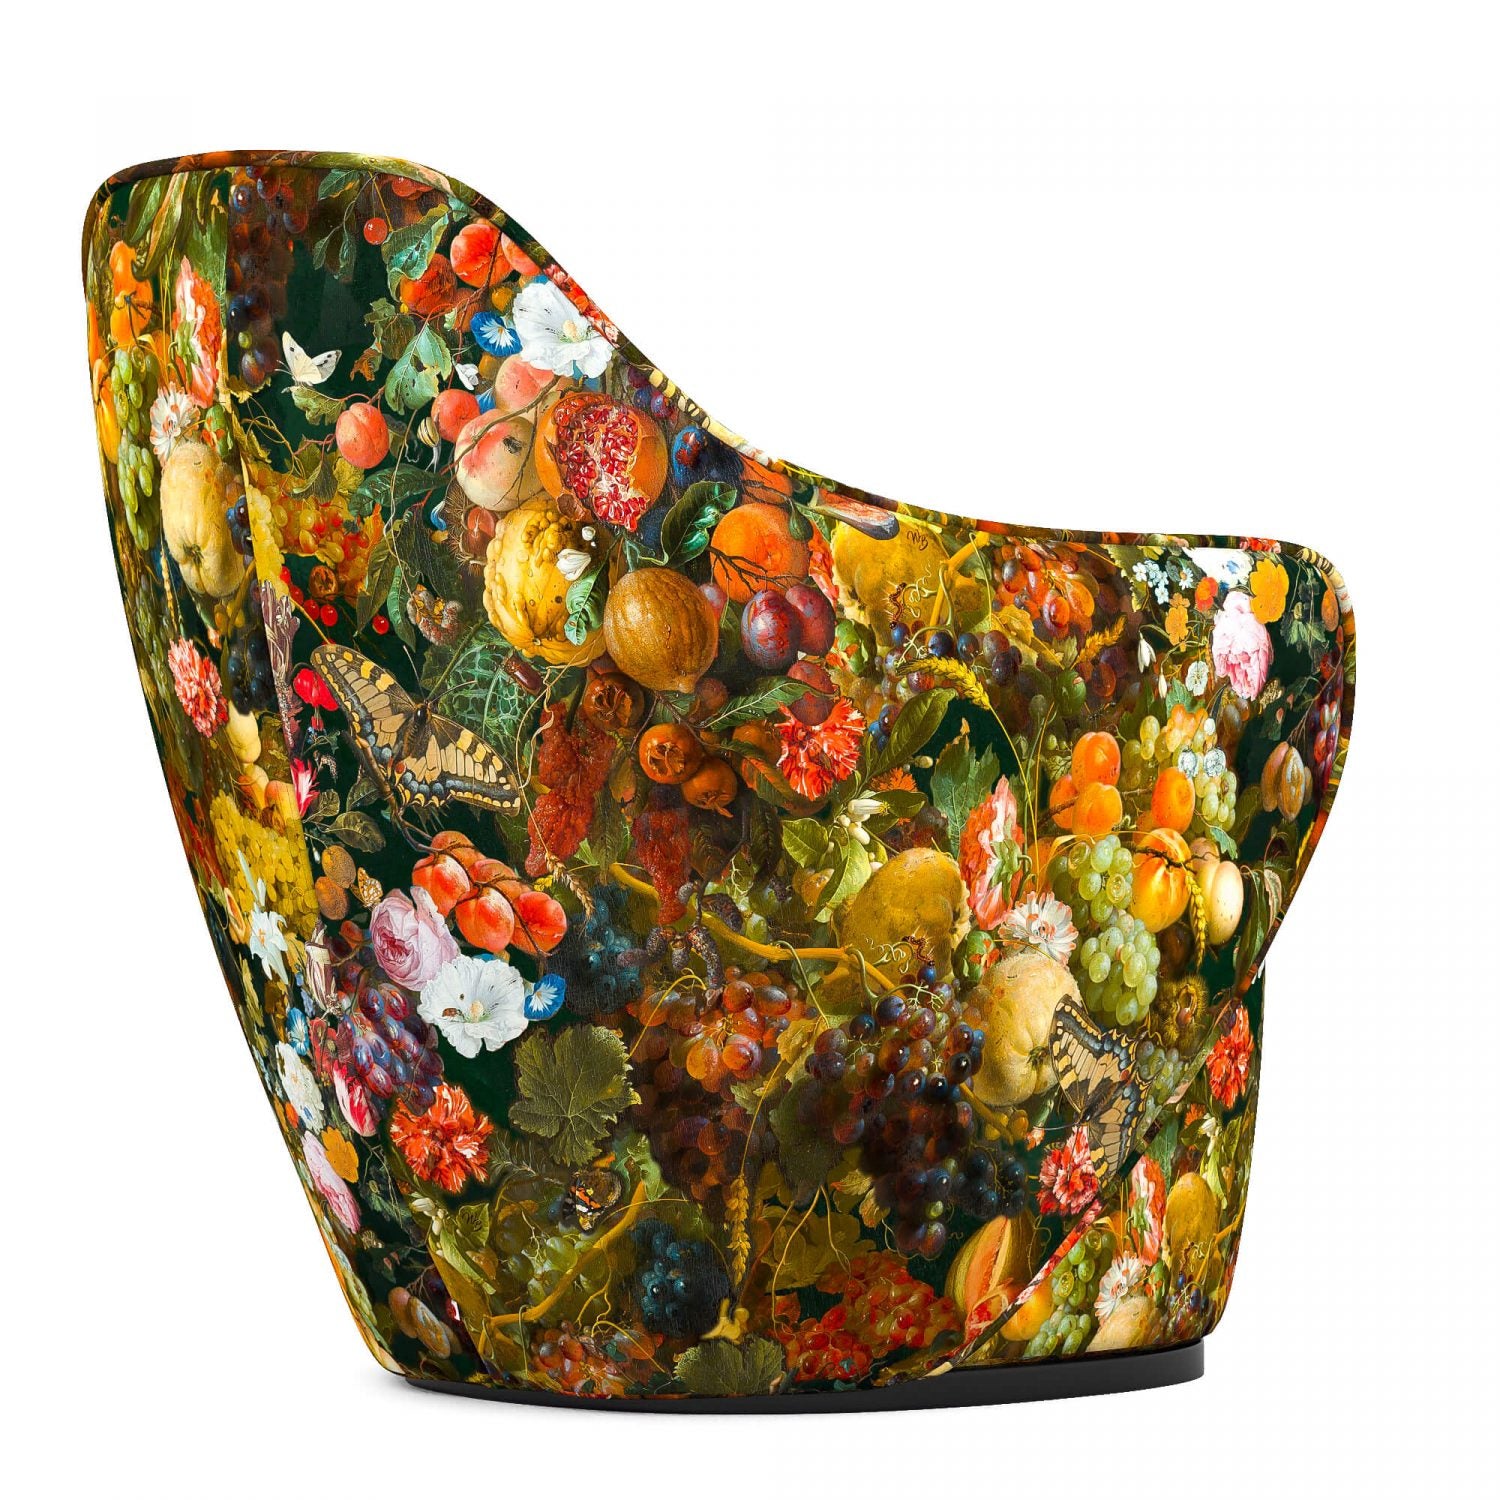 Garland of fruits and flowers hug armchair